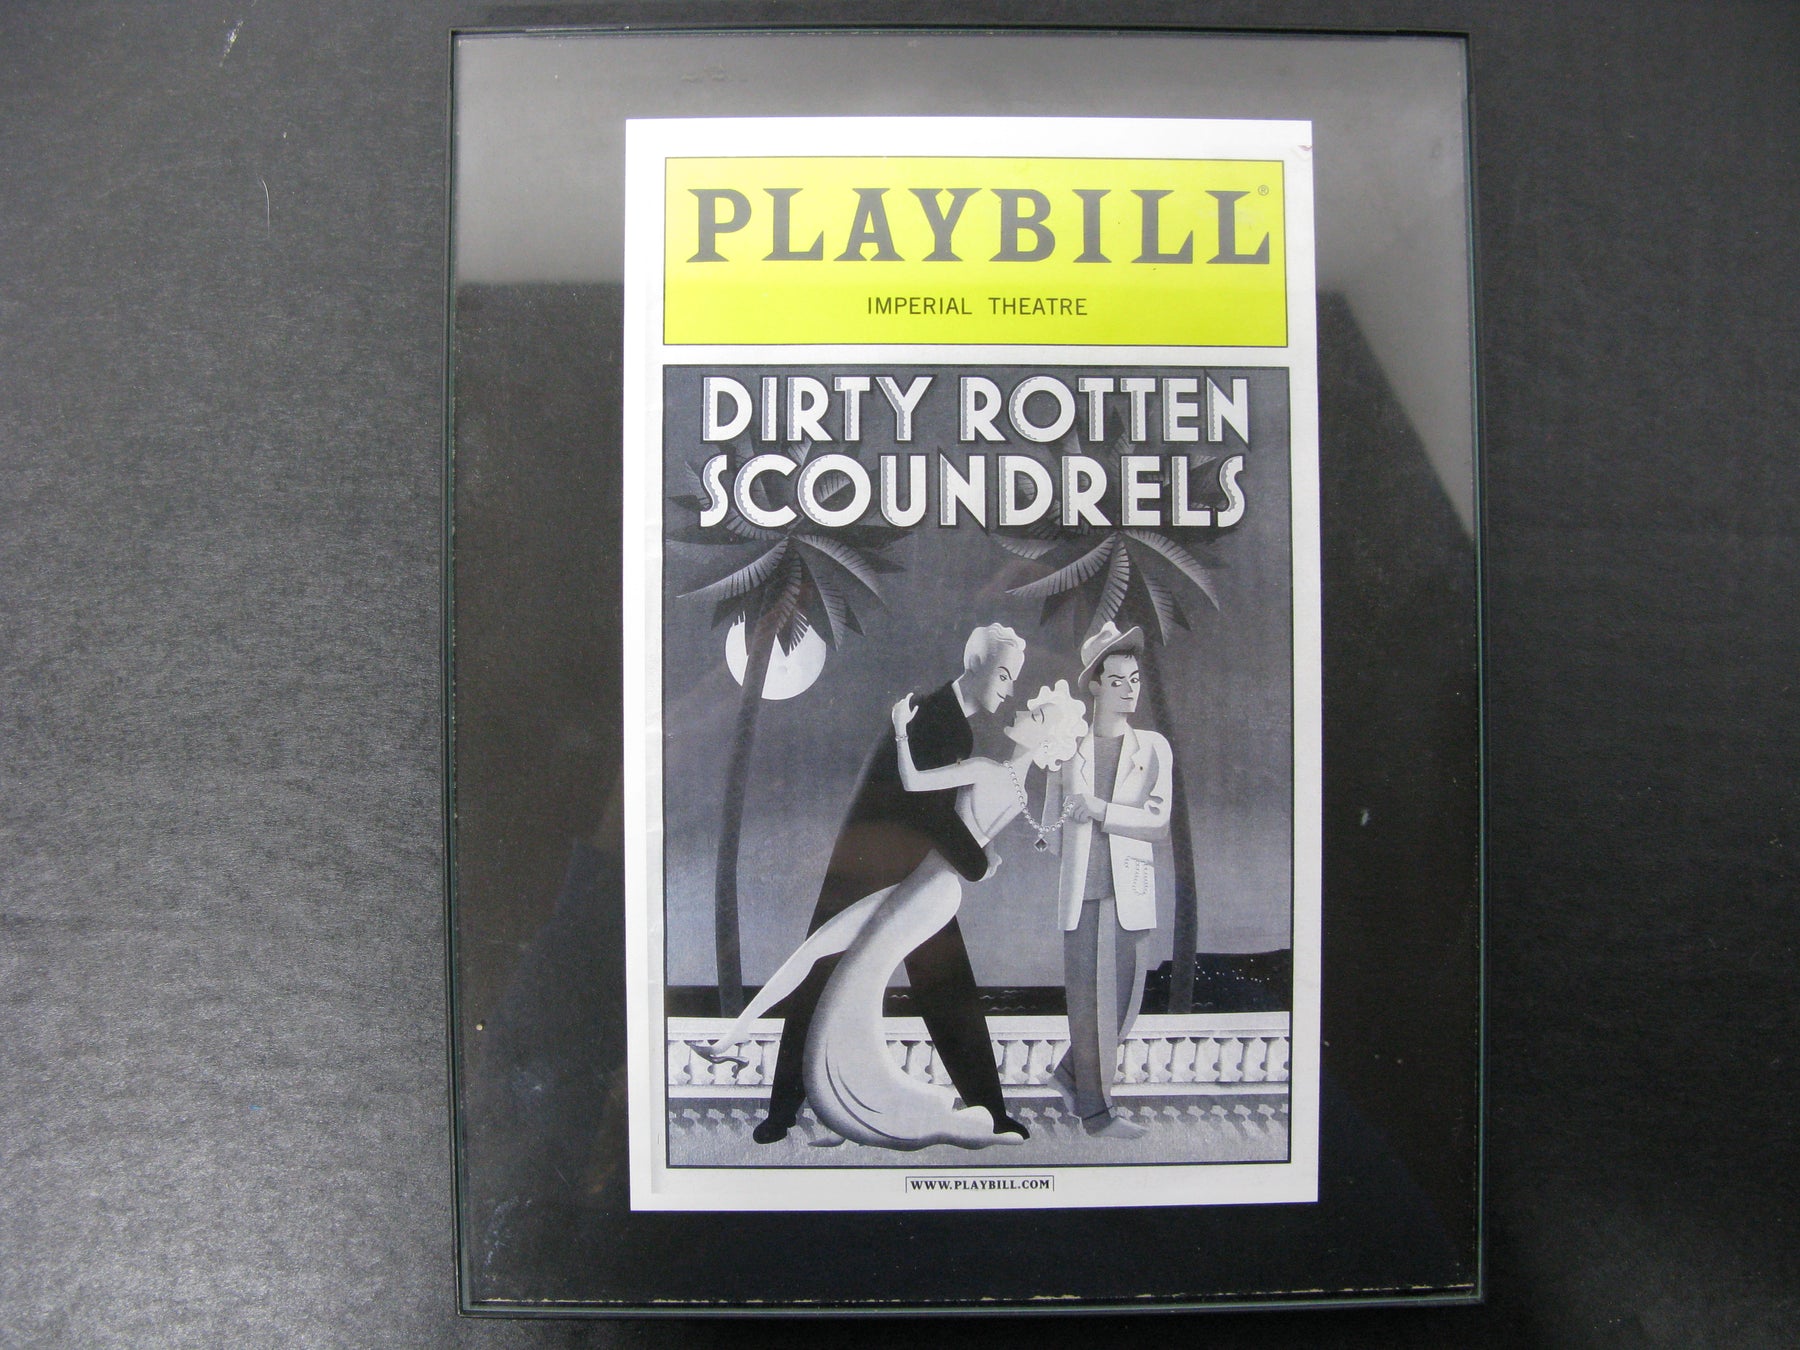 Playbill Imperial Theatre Dirty Rotten Scoundrels